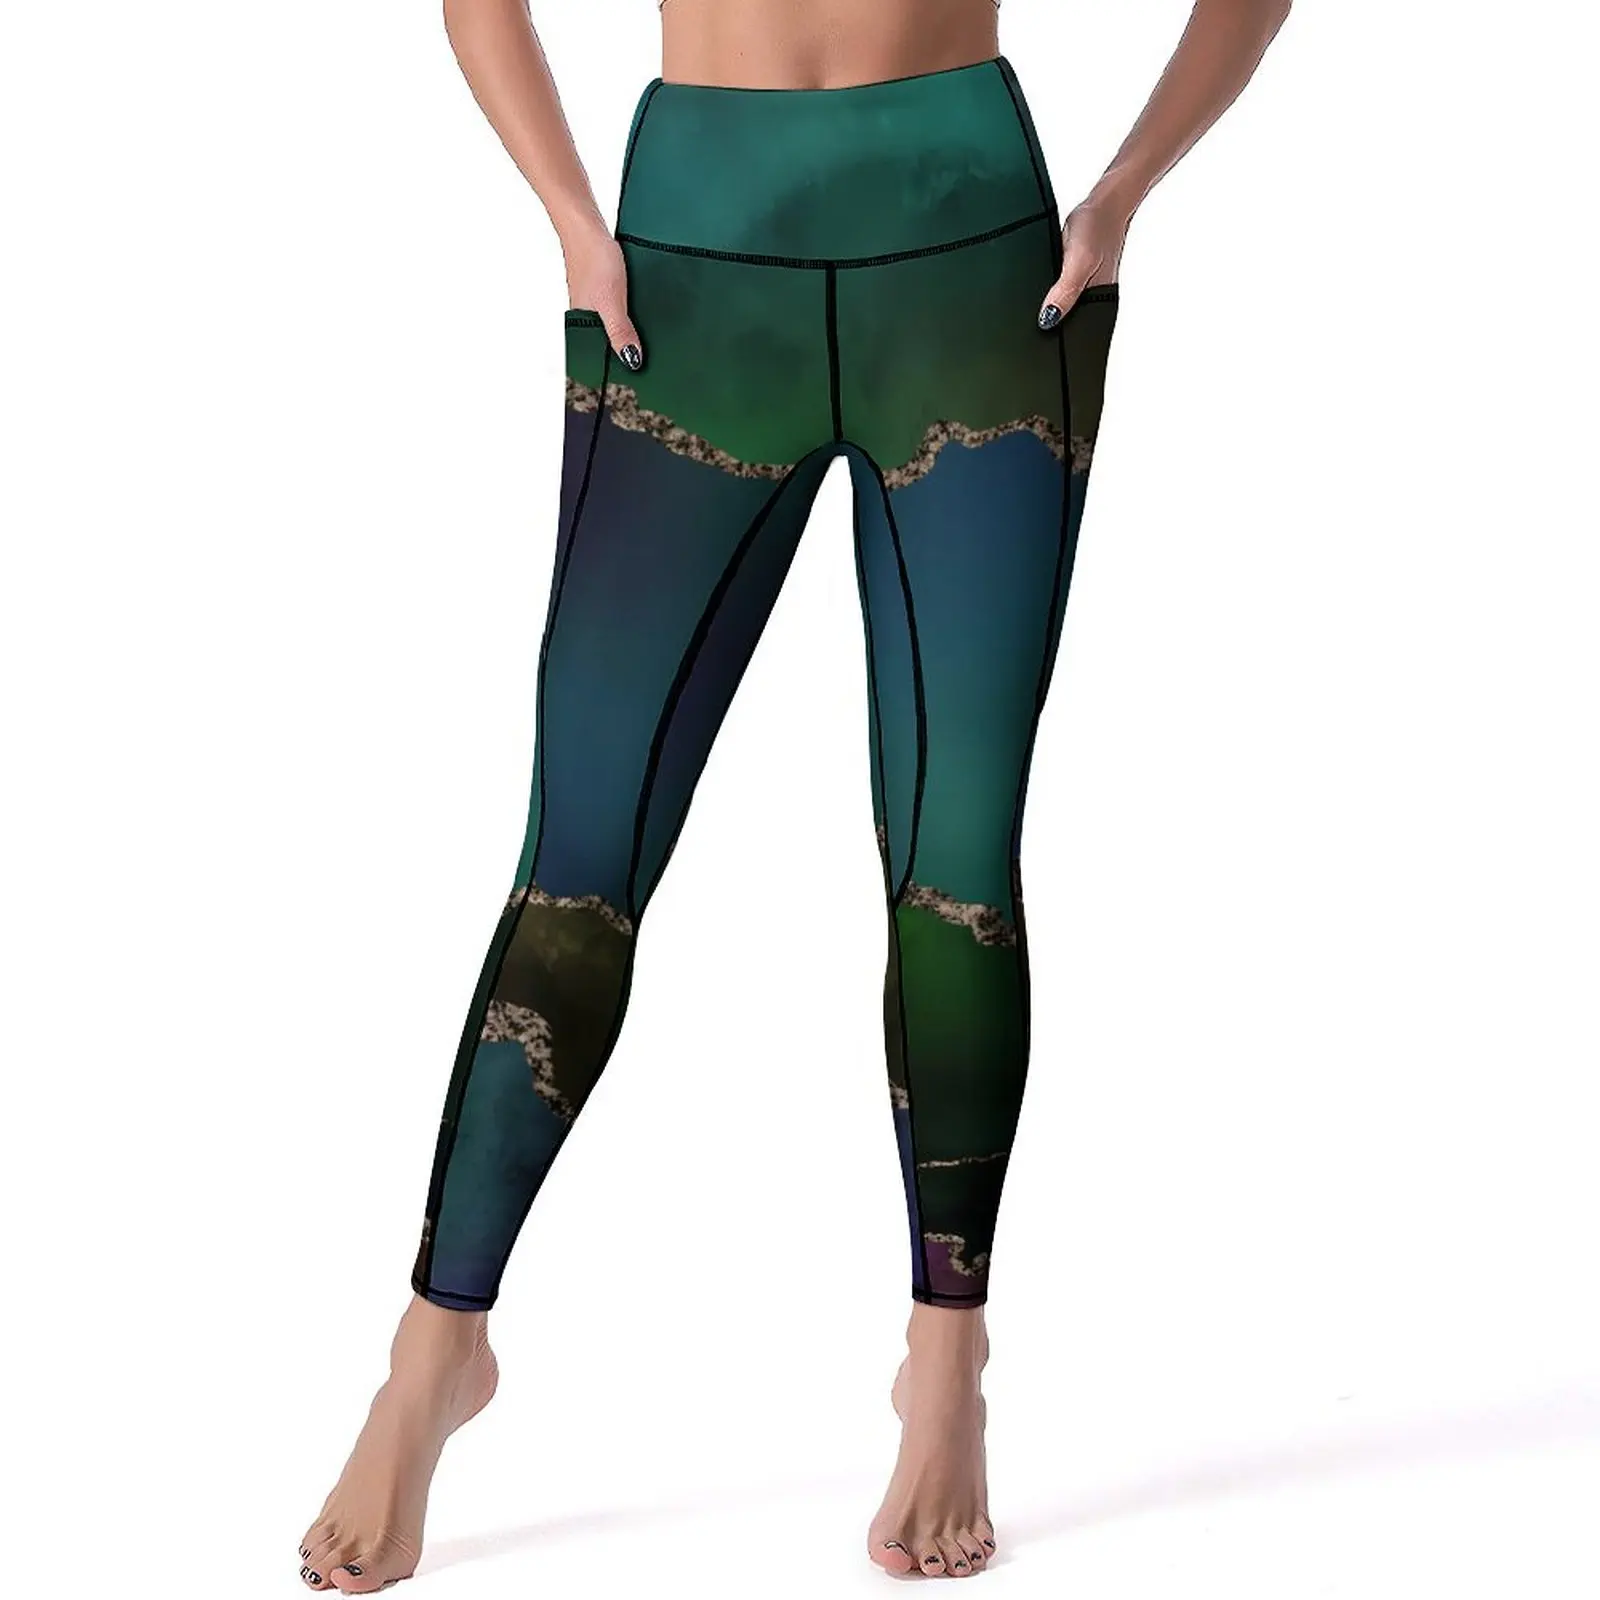 

Dark Ombre Leggings Sexy Colorful Print Fitness Running Yoga Pants High Waist Stretchy Sport Legging With Casual Design Leggins